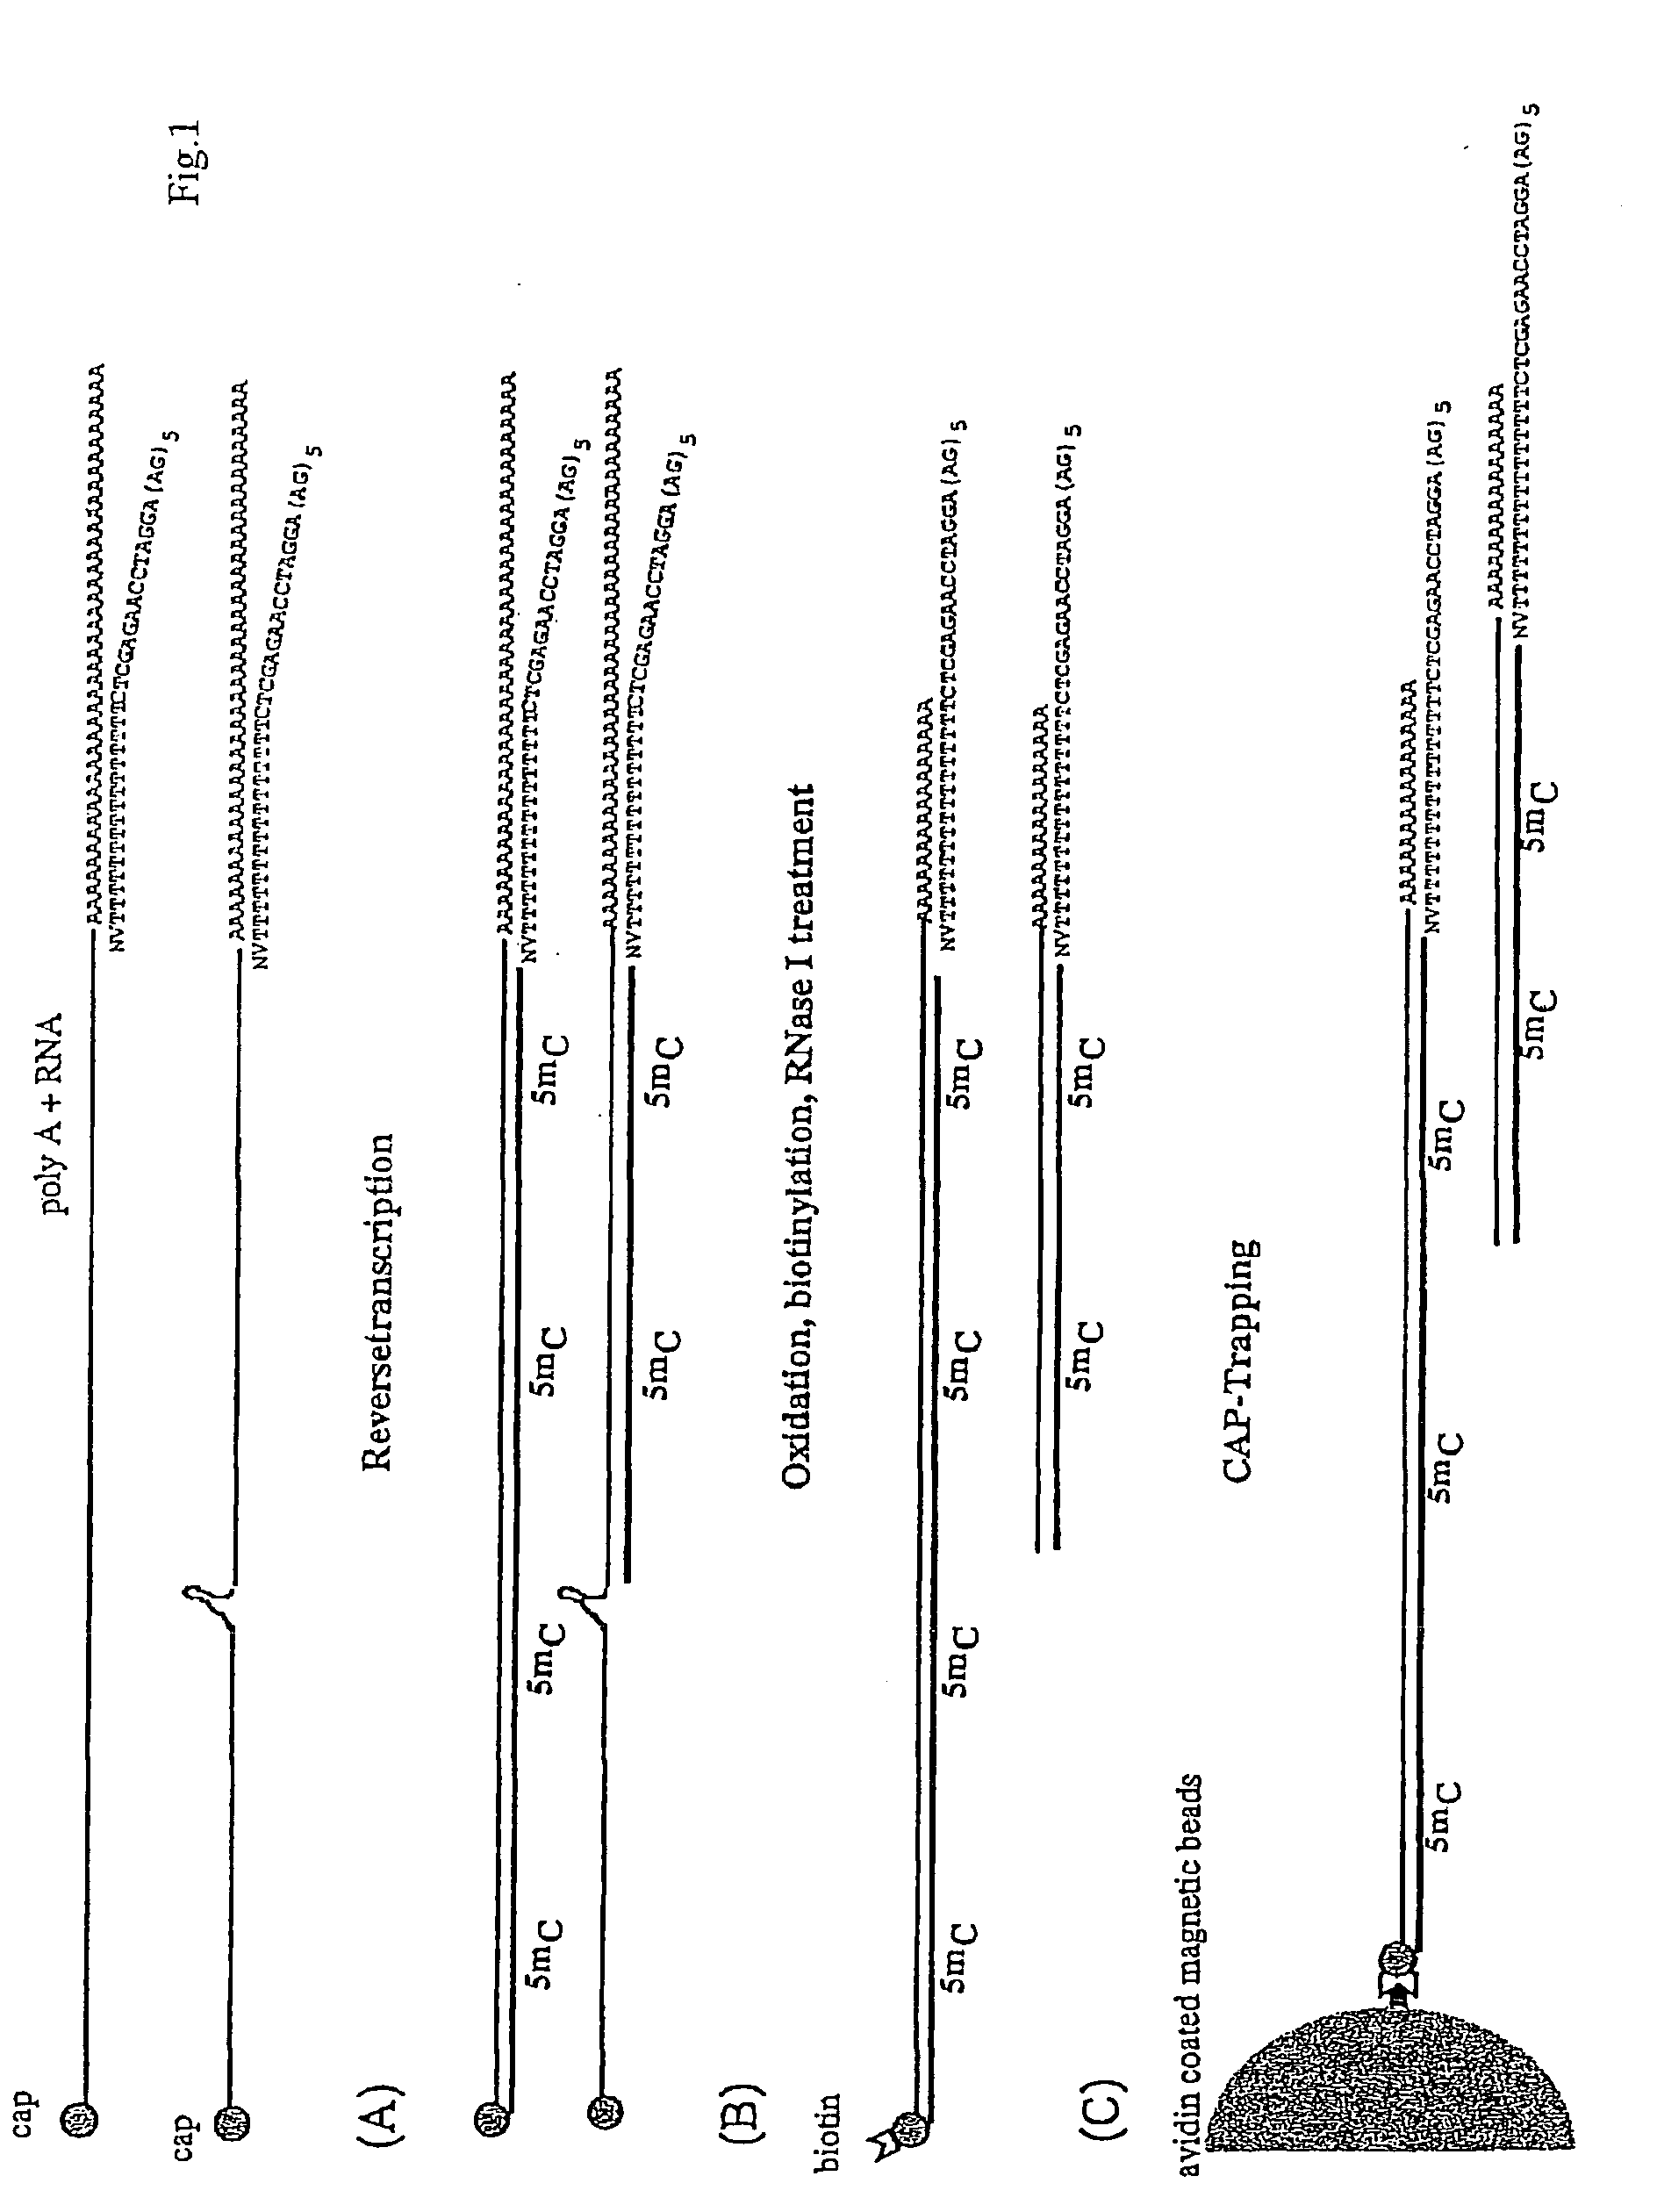 Oligonucleotide linkers comprising a variable cohesive portion and method for the preparation of polynucleotide libraries by using said linkers